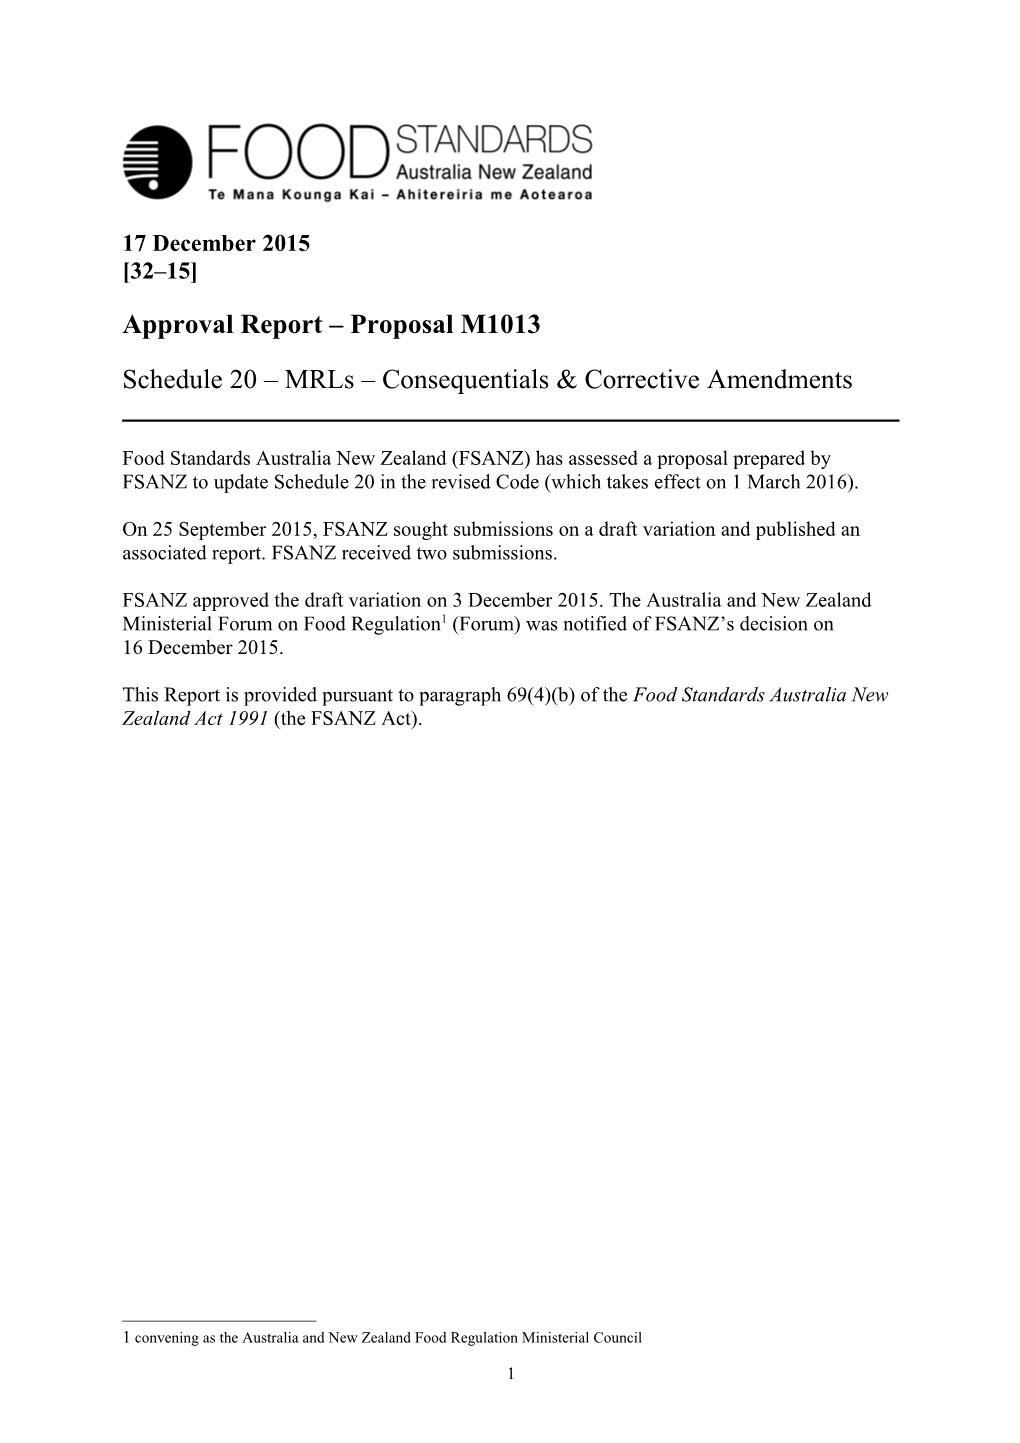 Approval Report Proposal M1013